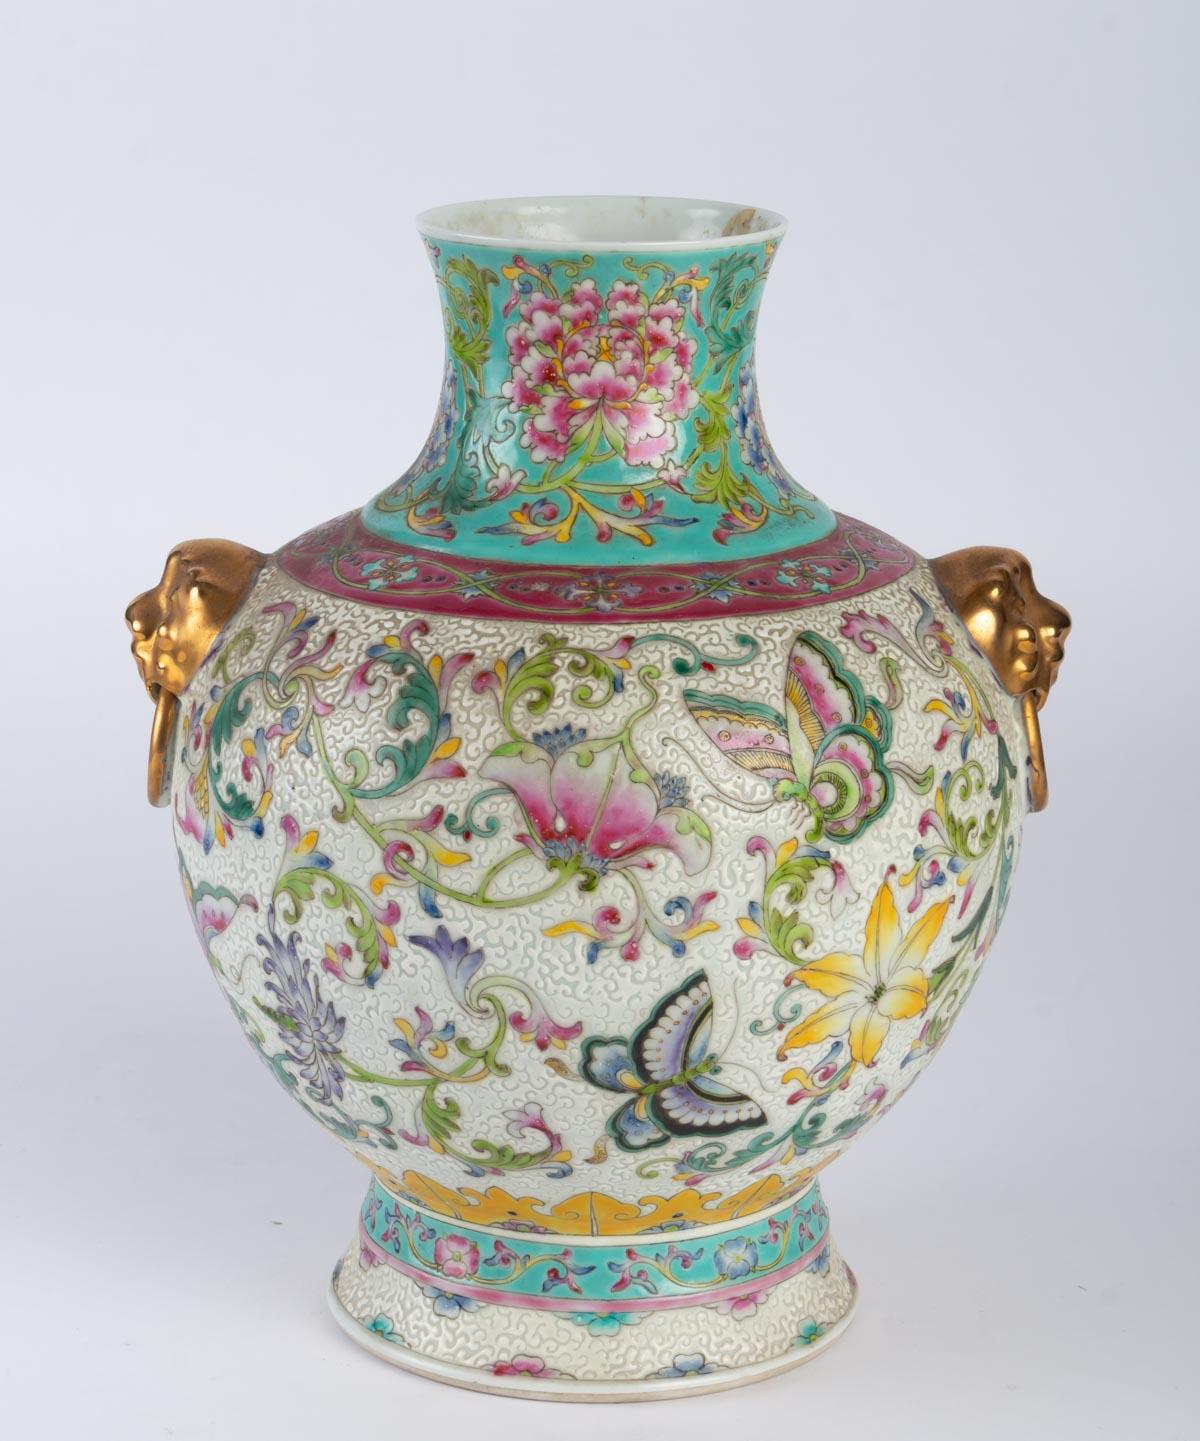 Porcelain vase decorated with floral scrolls, taken in the shape of a golden Fô dog's head.
Apocryphal Kien-Long stamp, China, Republic period circa 1960.
Perfect condition.

Measures: H 28 cm, D 22.5 cm.